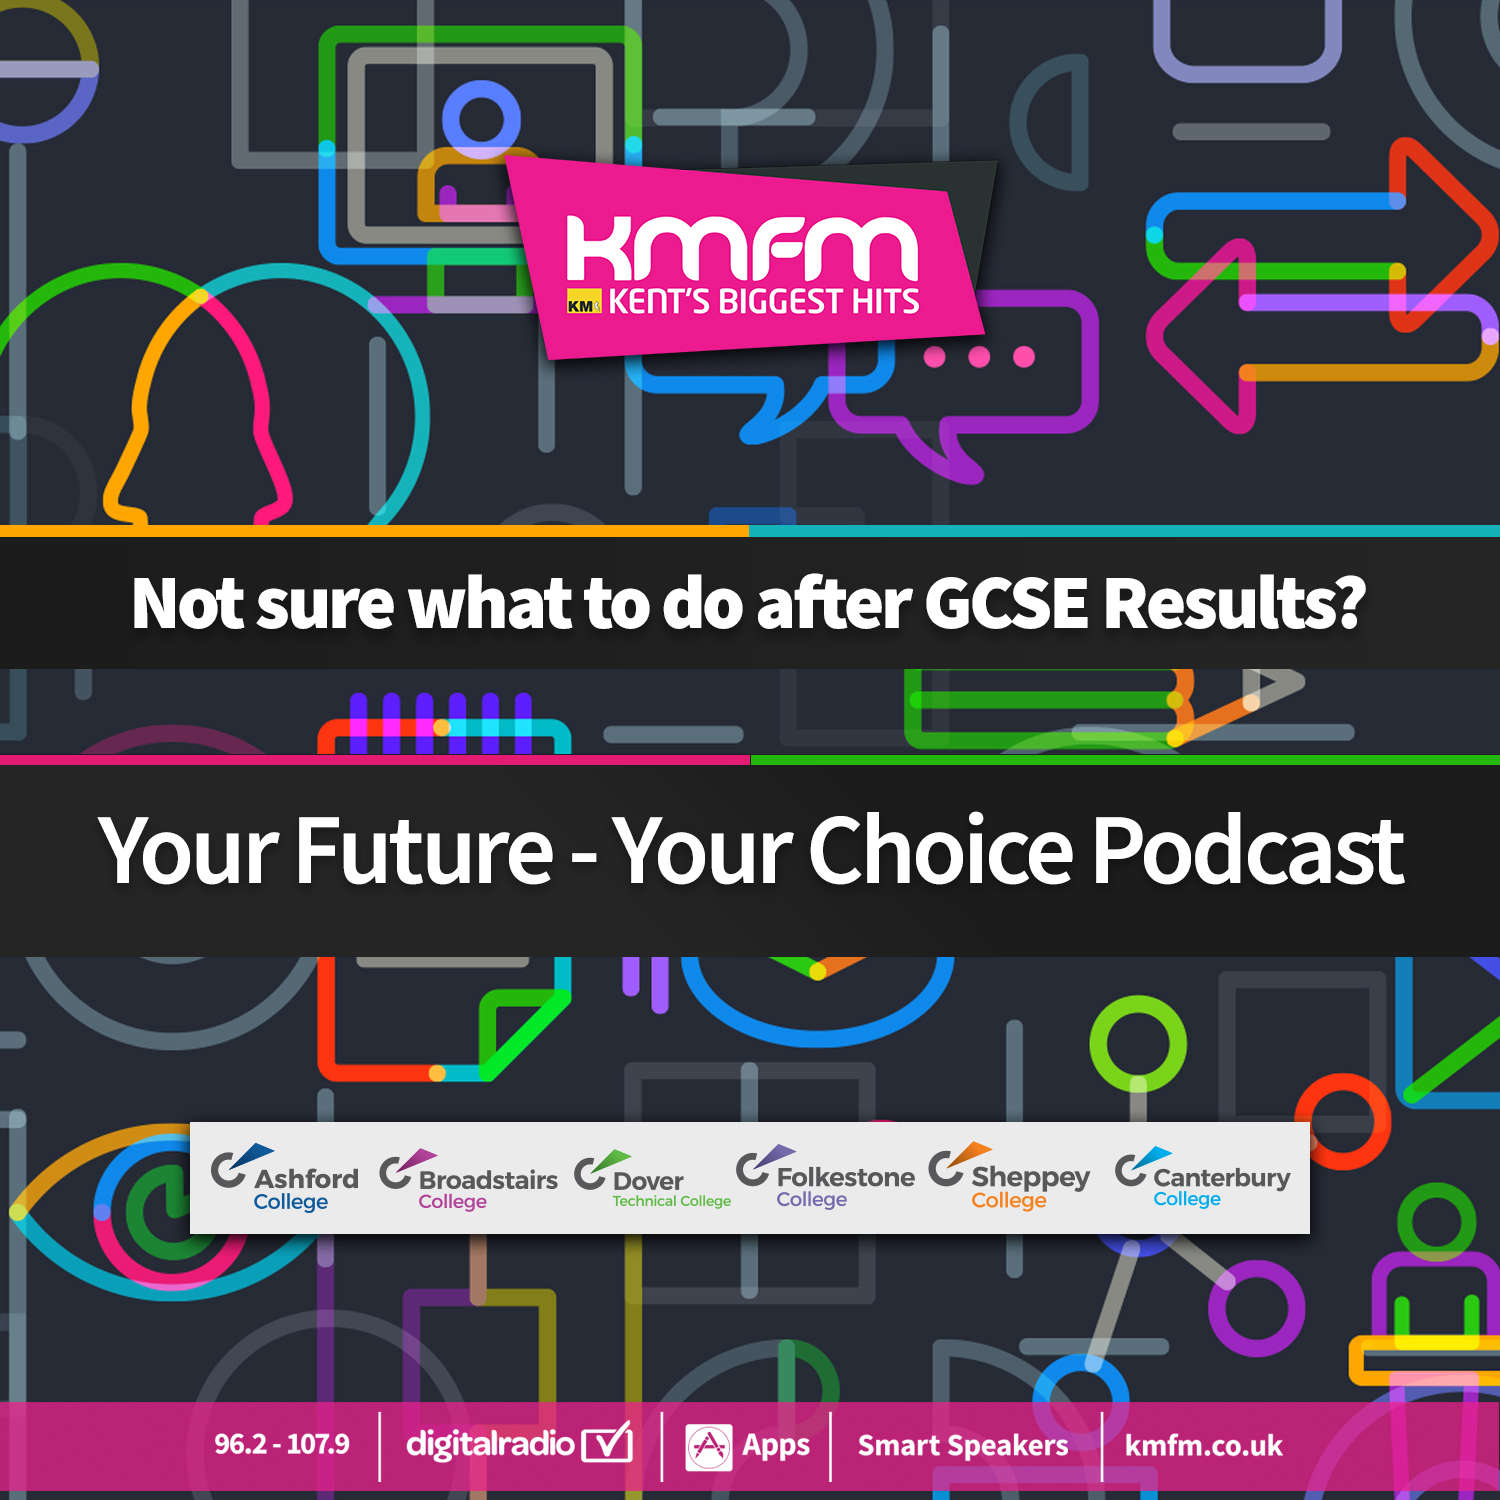 EKC Group - Your Future Your Choice